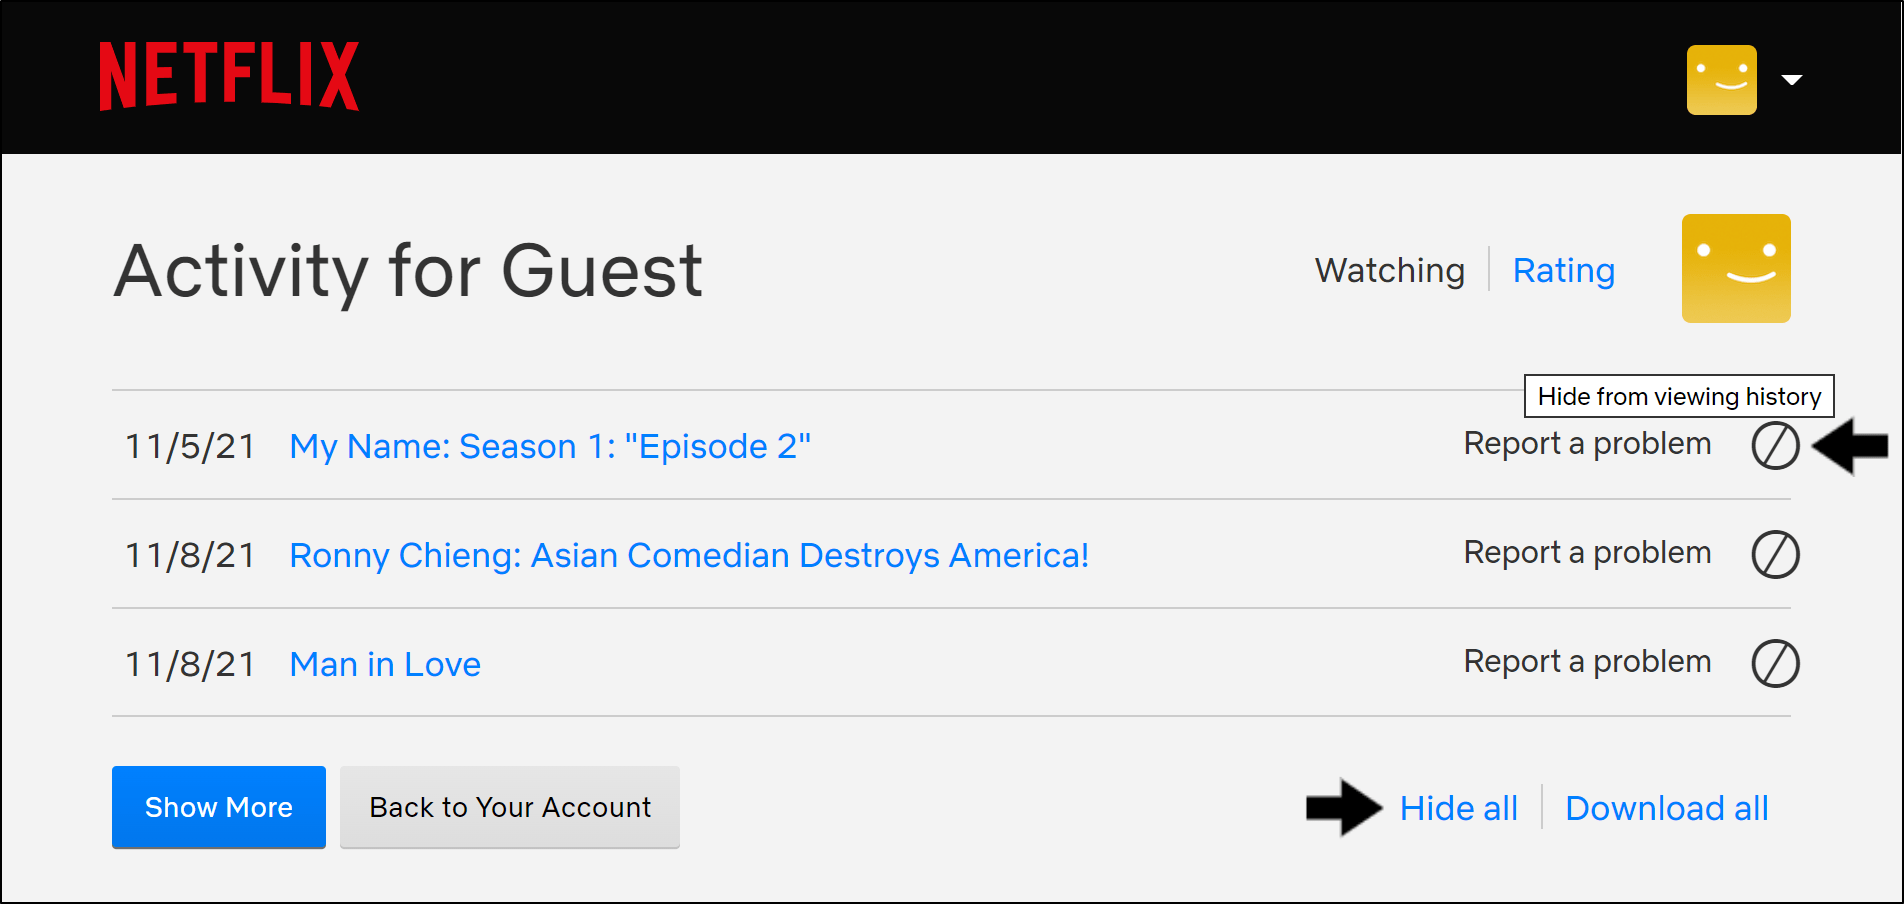 delete titles from your Netflix Continue Watching list through the account settings to fix the Netflix Continue Watching or My List features not working, showing, loading, or updating